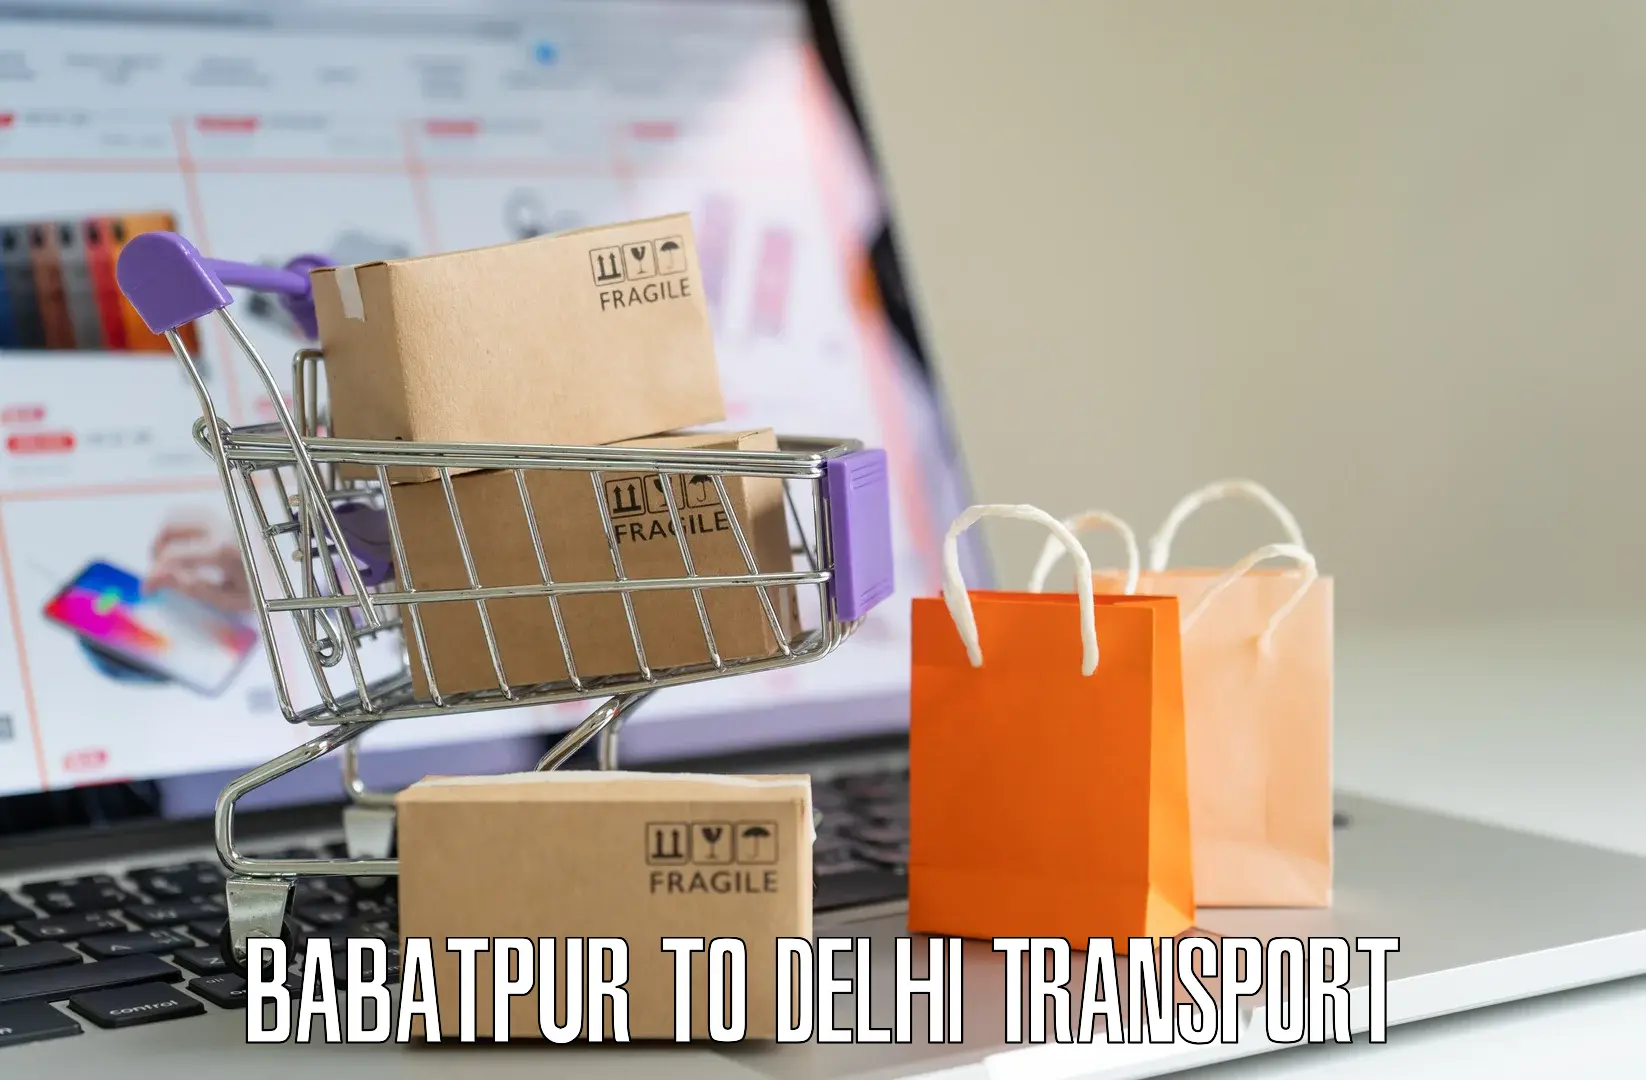 Daily transport service Babatpur to East Delhi